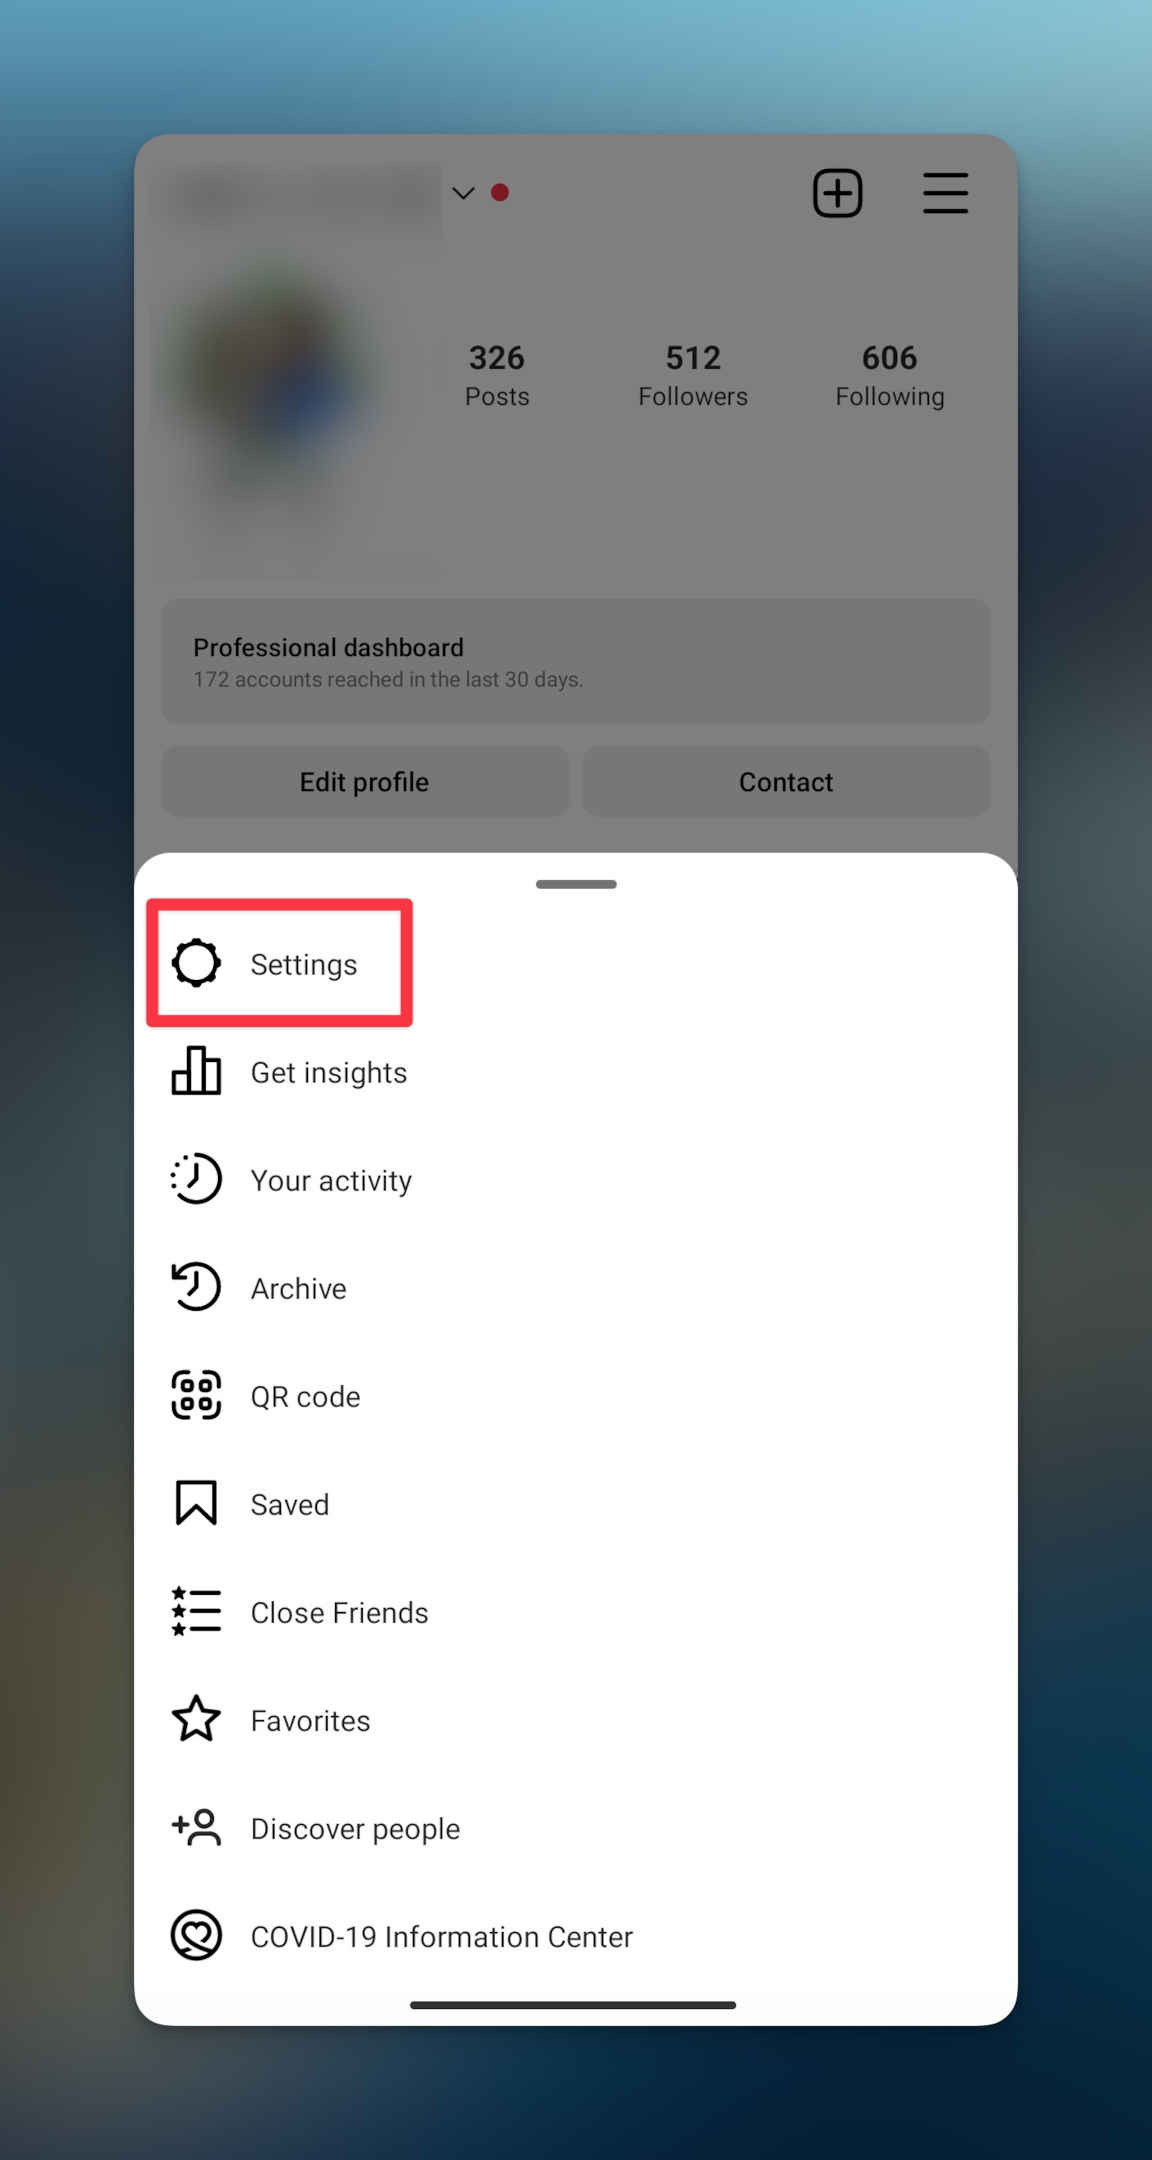 Remote.tools shows to tap on settings icon to switch account type on Instagram